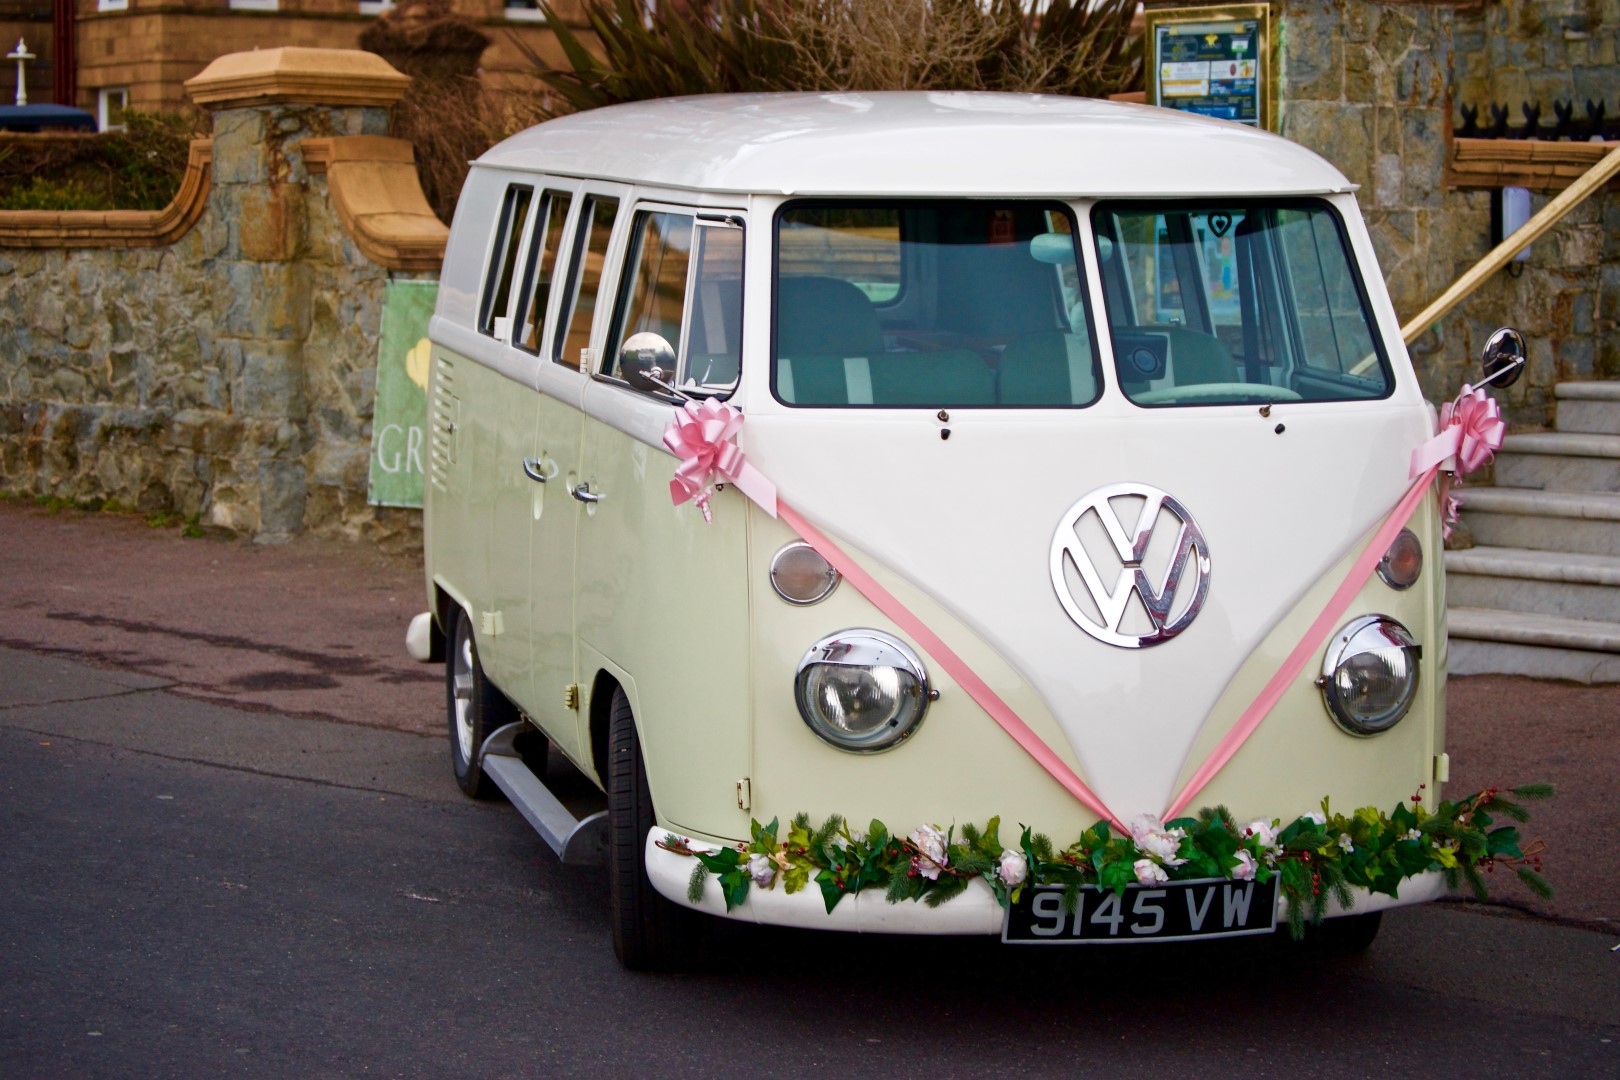 Volkswagen Bus decorated for a wedding